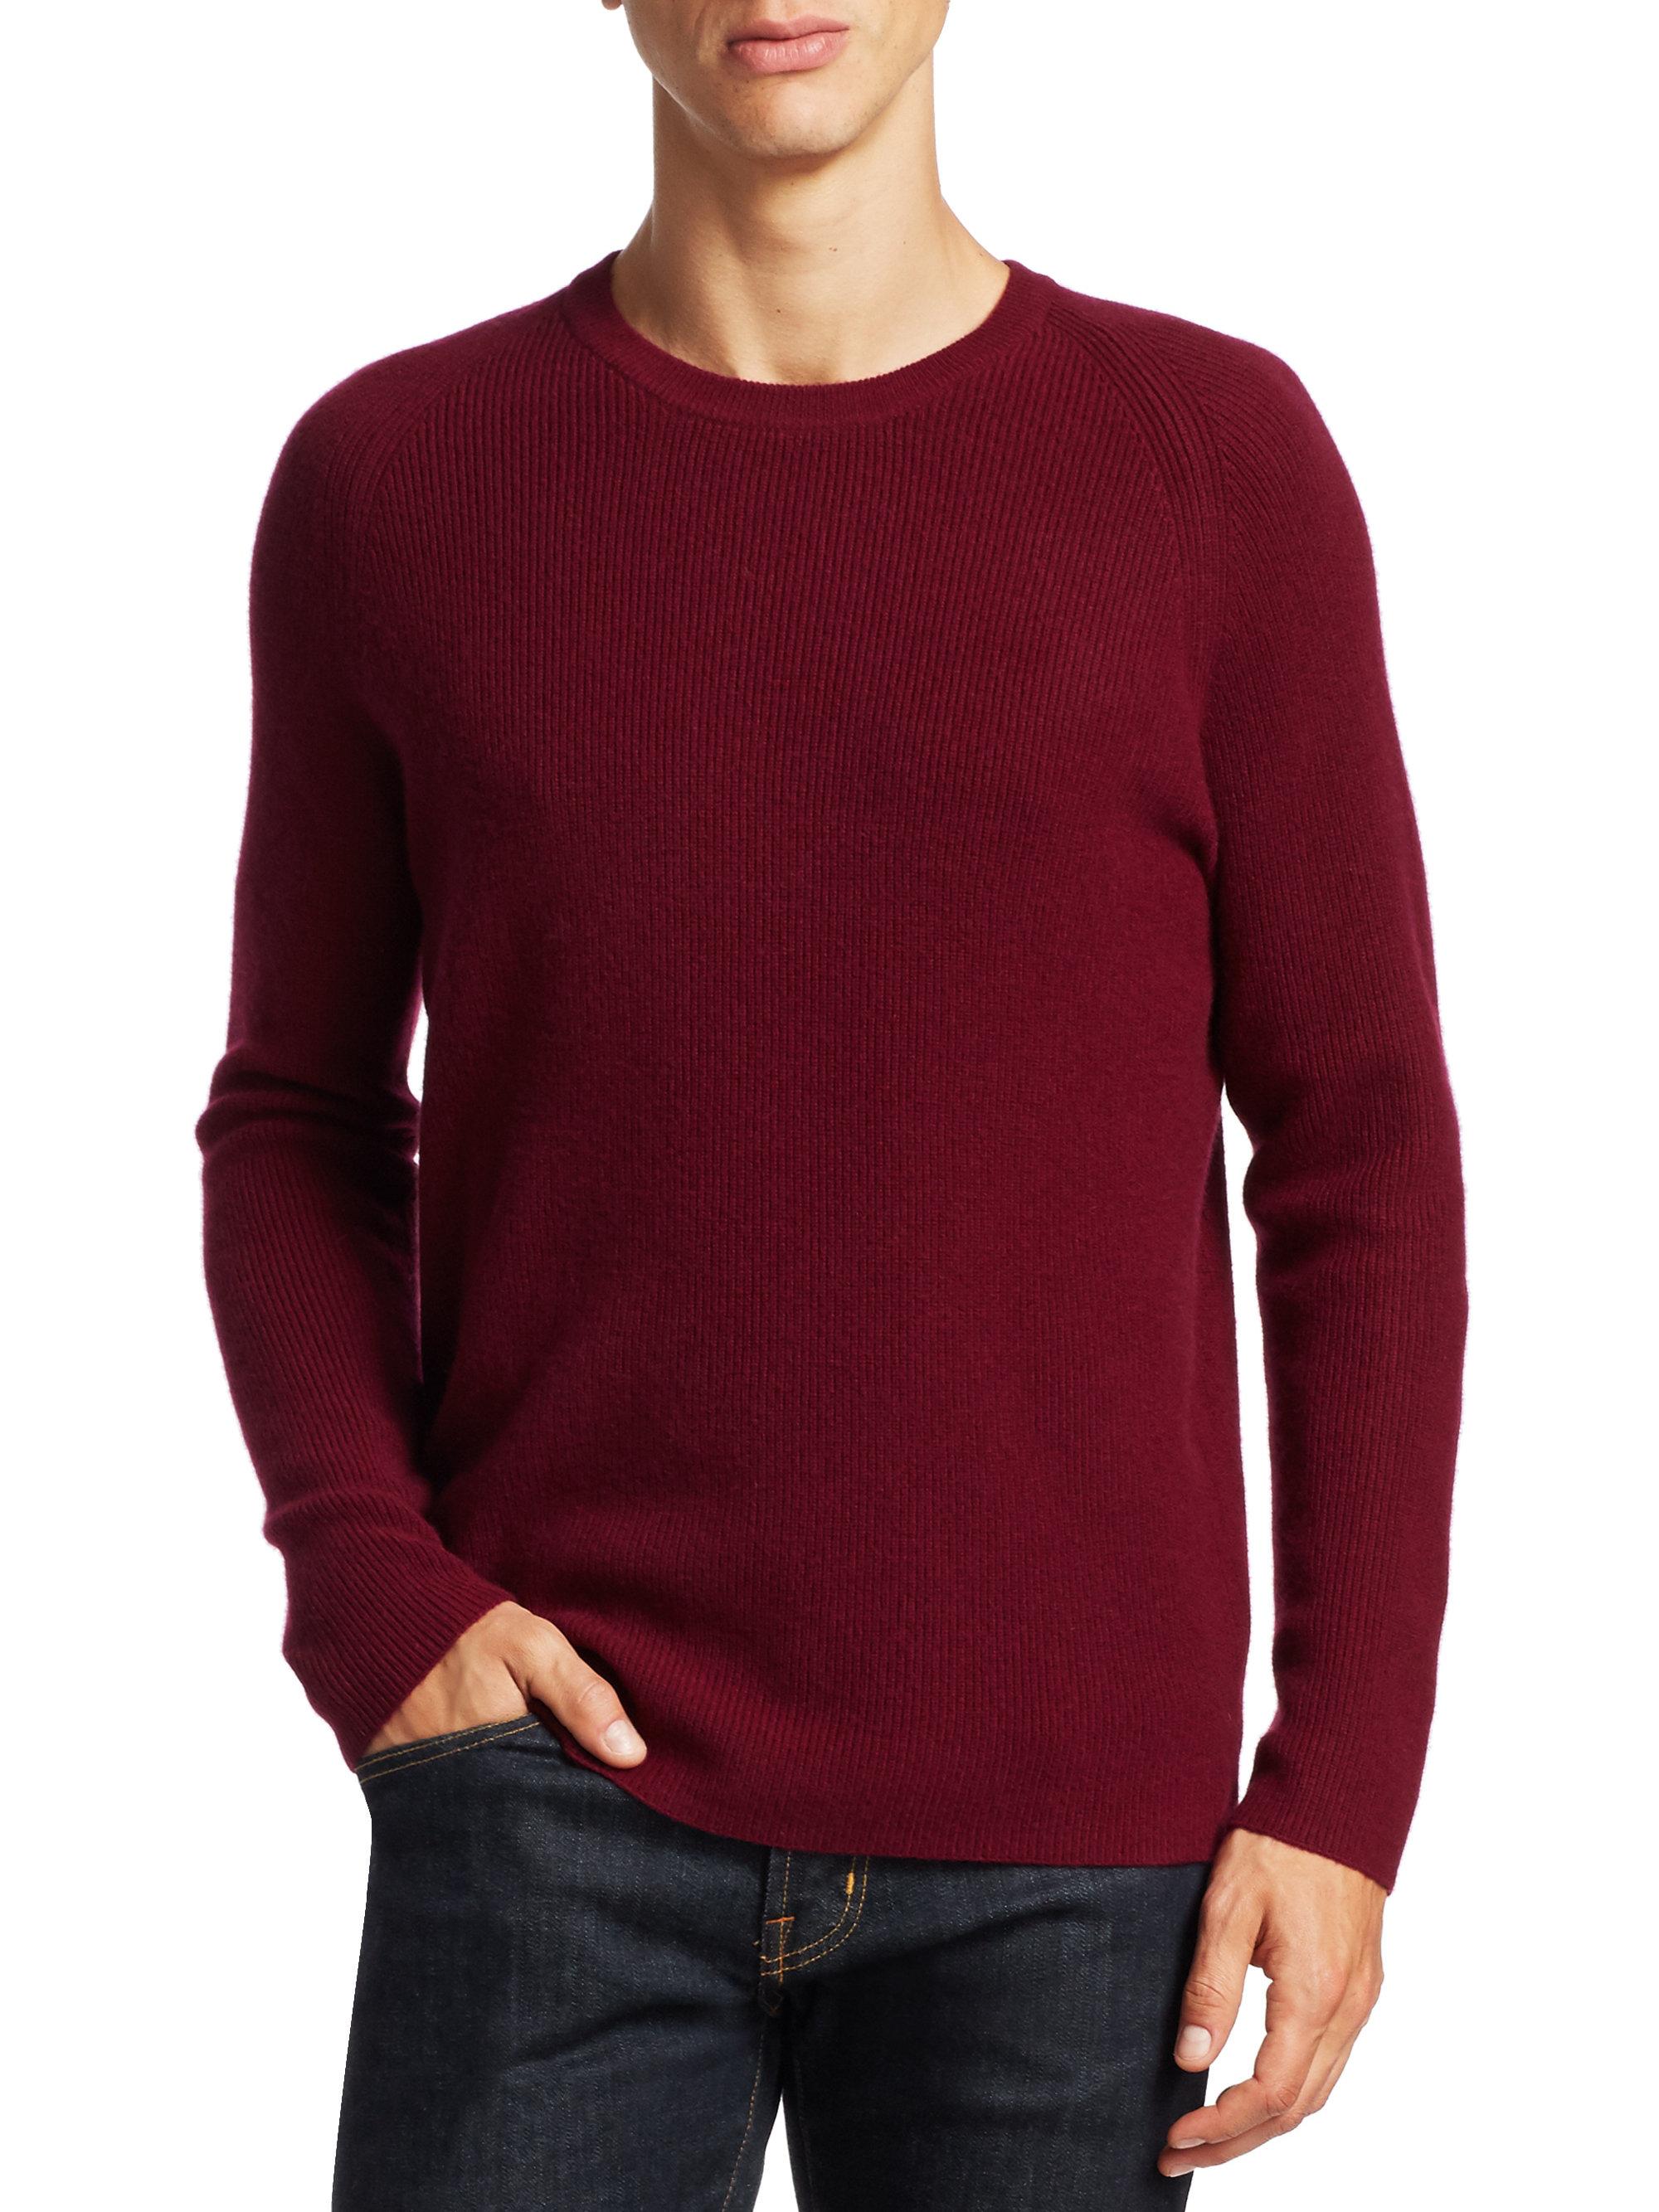 Theory Enzo Cashmere Sweater in Red for Men - Lyst